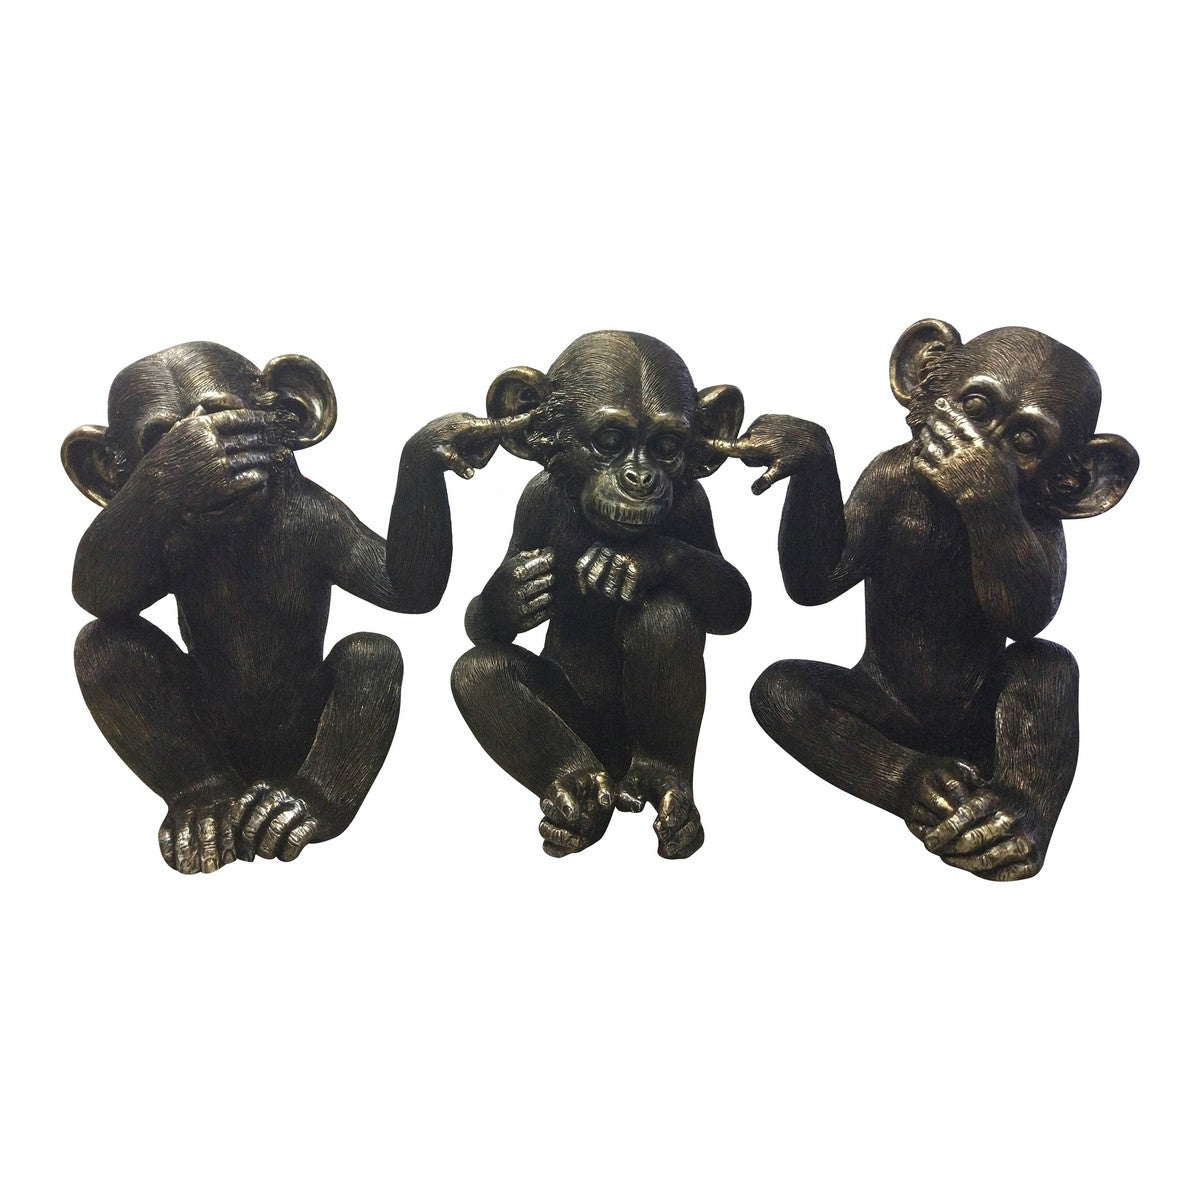 Moe's Home Collection He Did It Chimps Set of Three - LA-1060-02 - Moe's Home Collection - Art - Minimal And Modern - 1